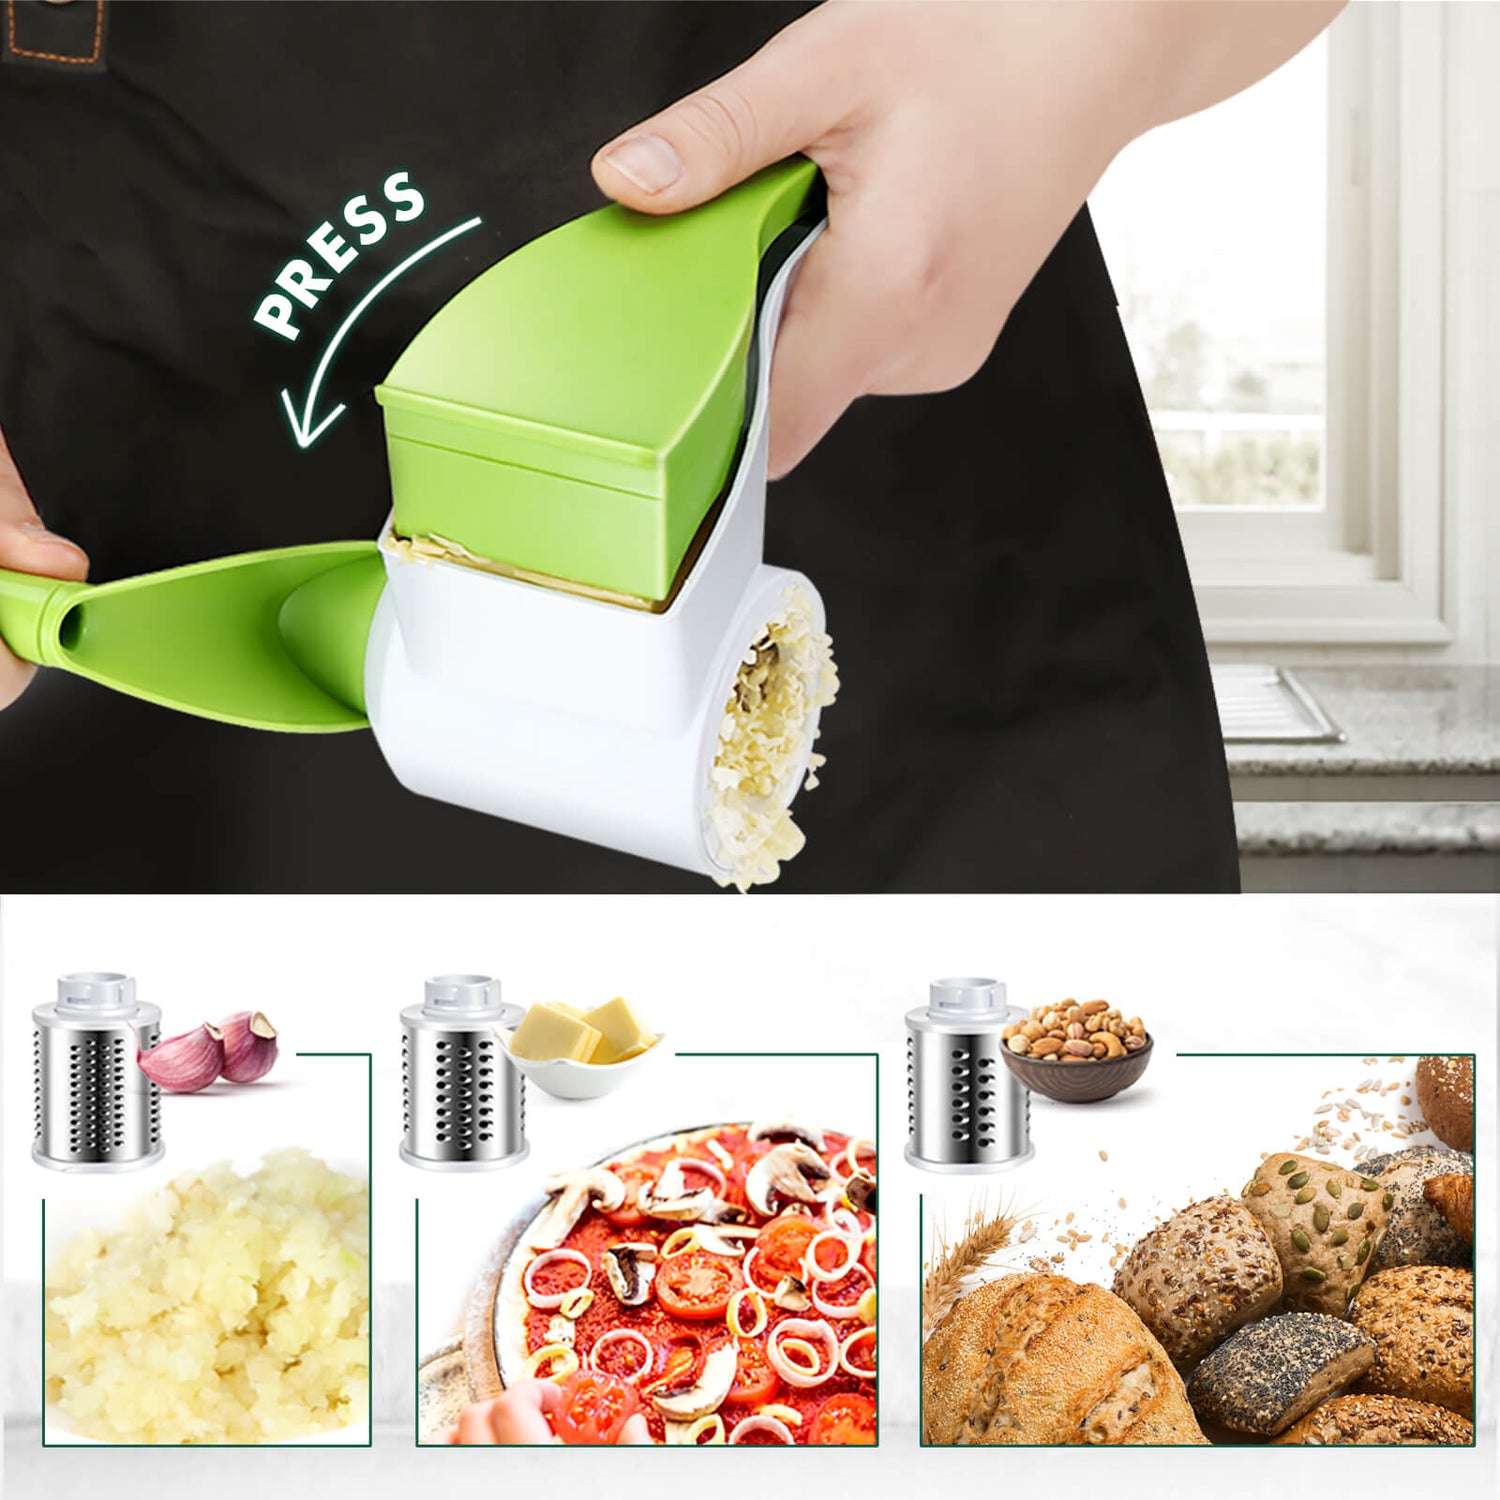 Masthome Manual Handheld Rotary Cheese Grater